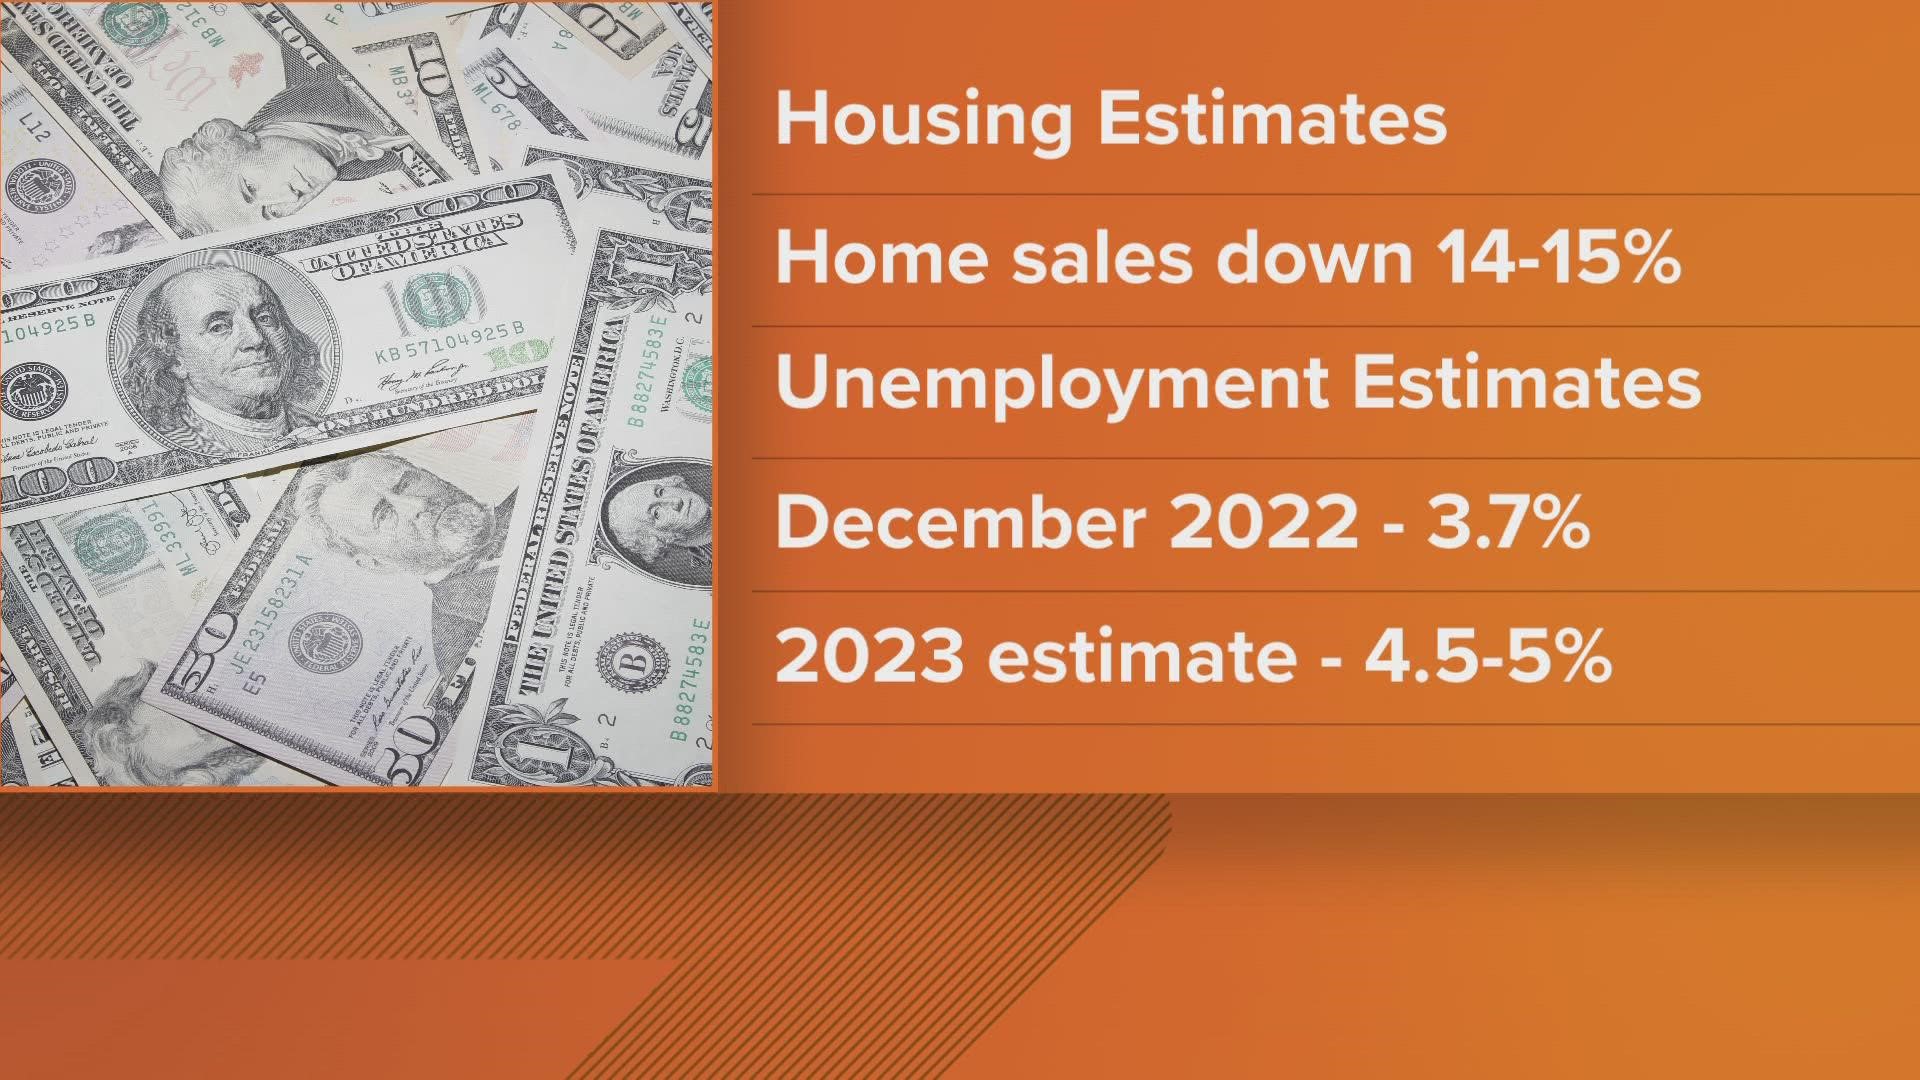 Financial analyst Bruce Allen goes over the economic outlook for 2023 after reviewing forecasts from the top economists on Wall Street.